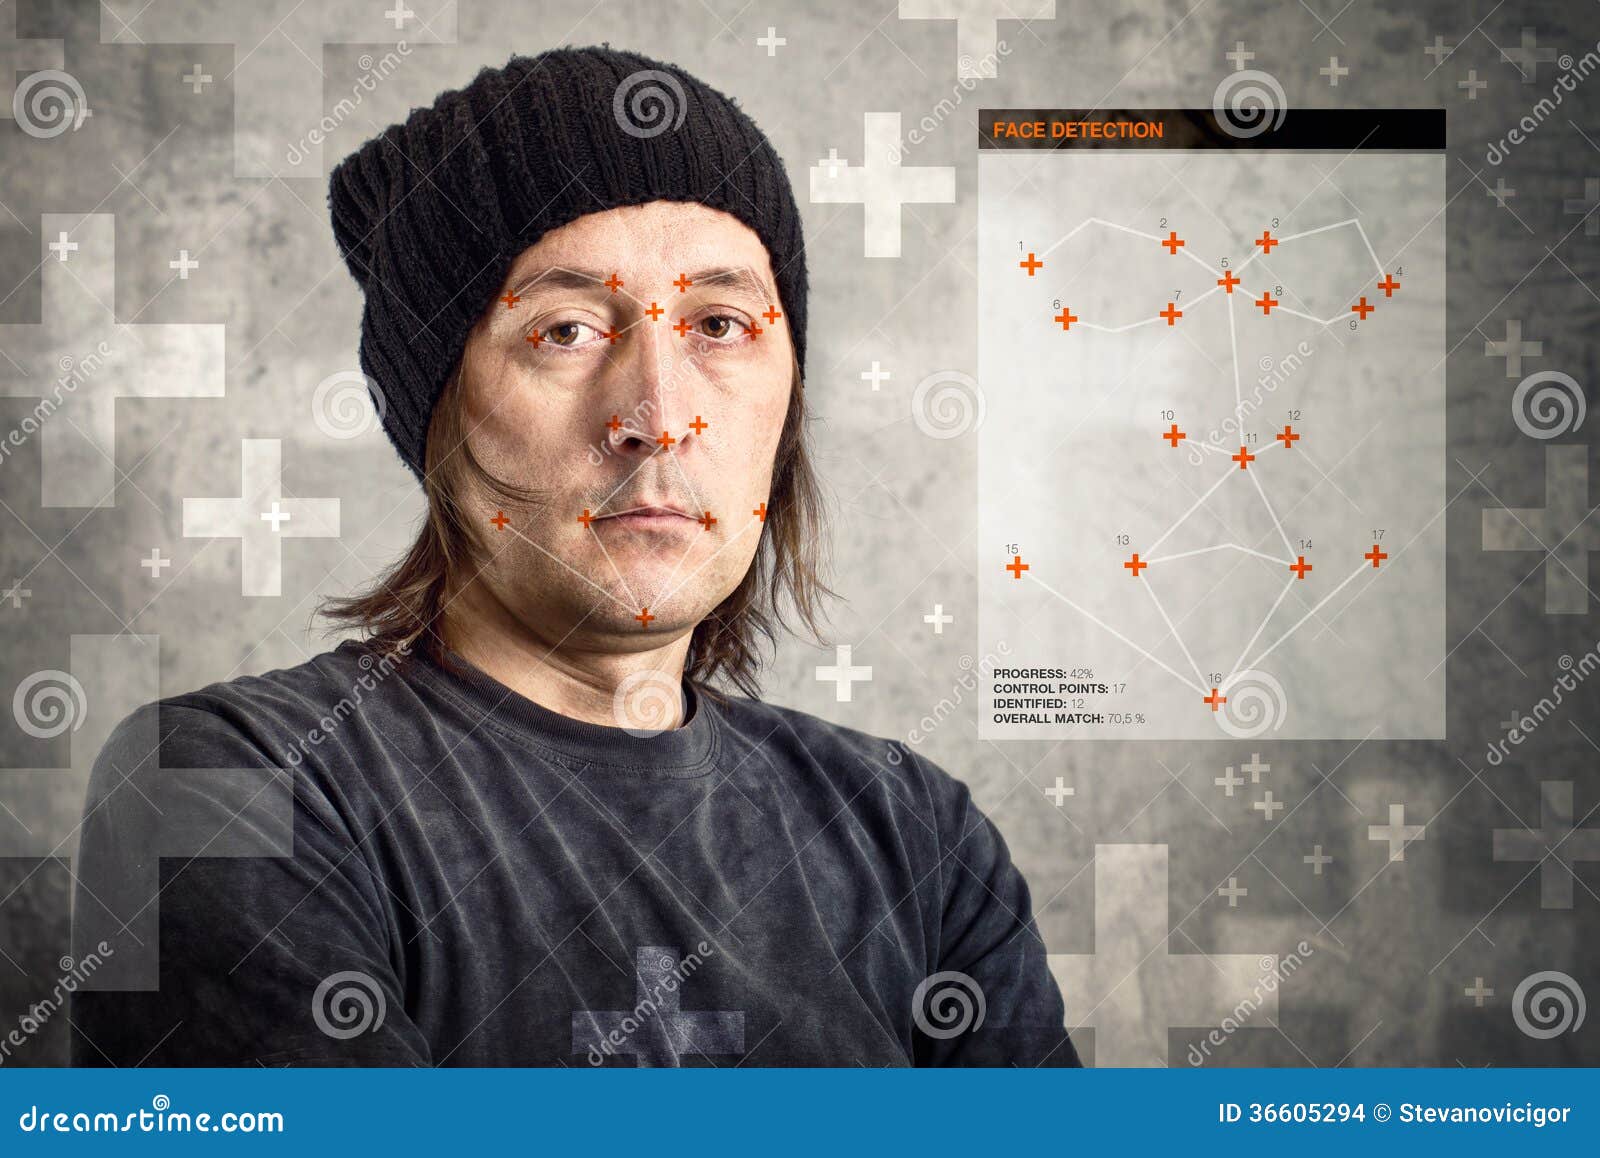 face detection software recognizing a face of man